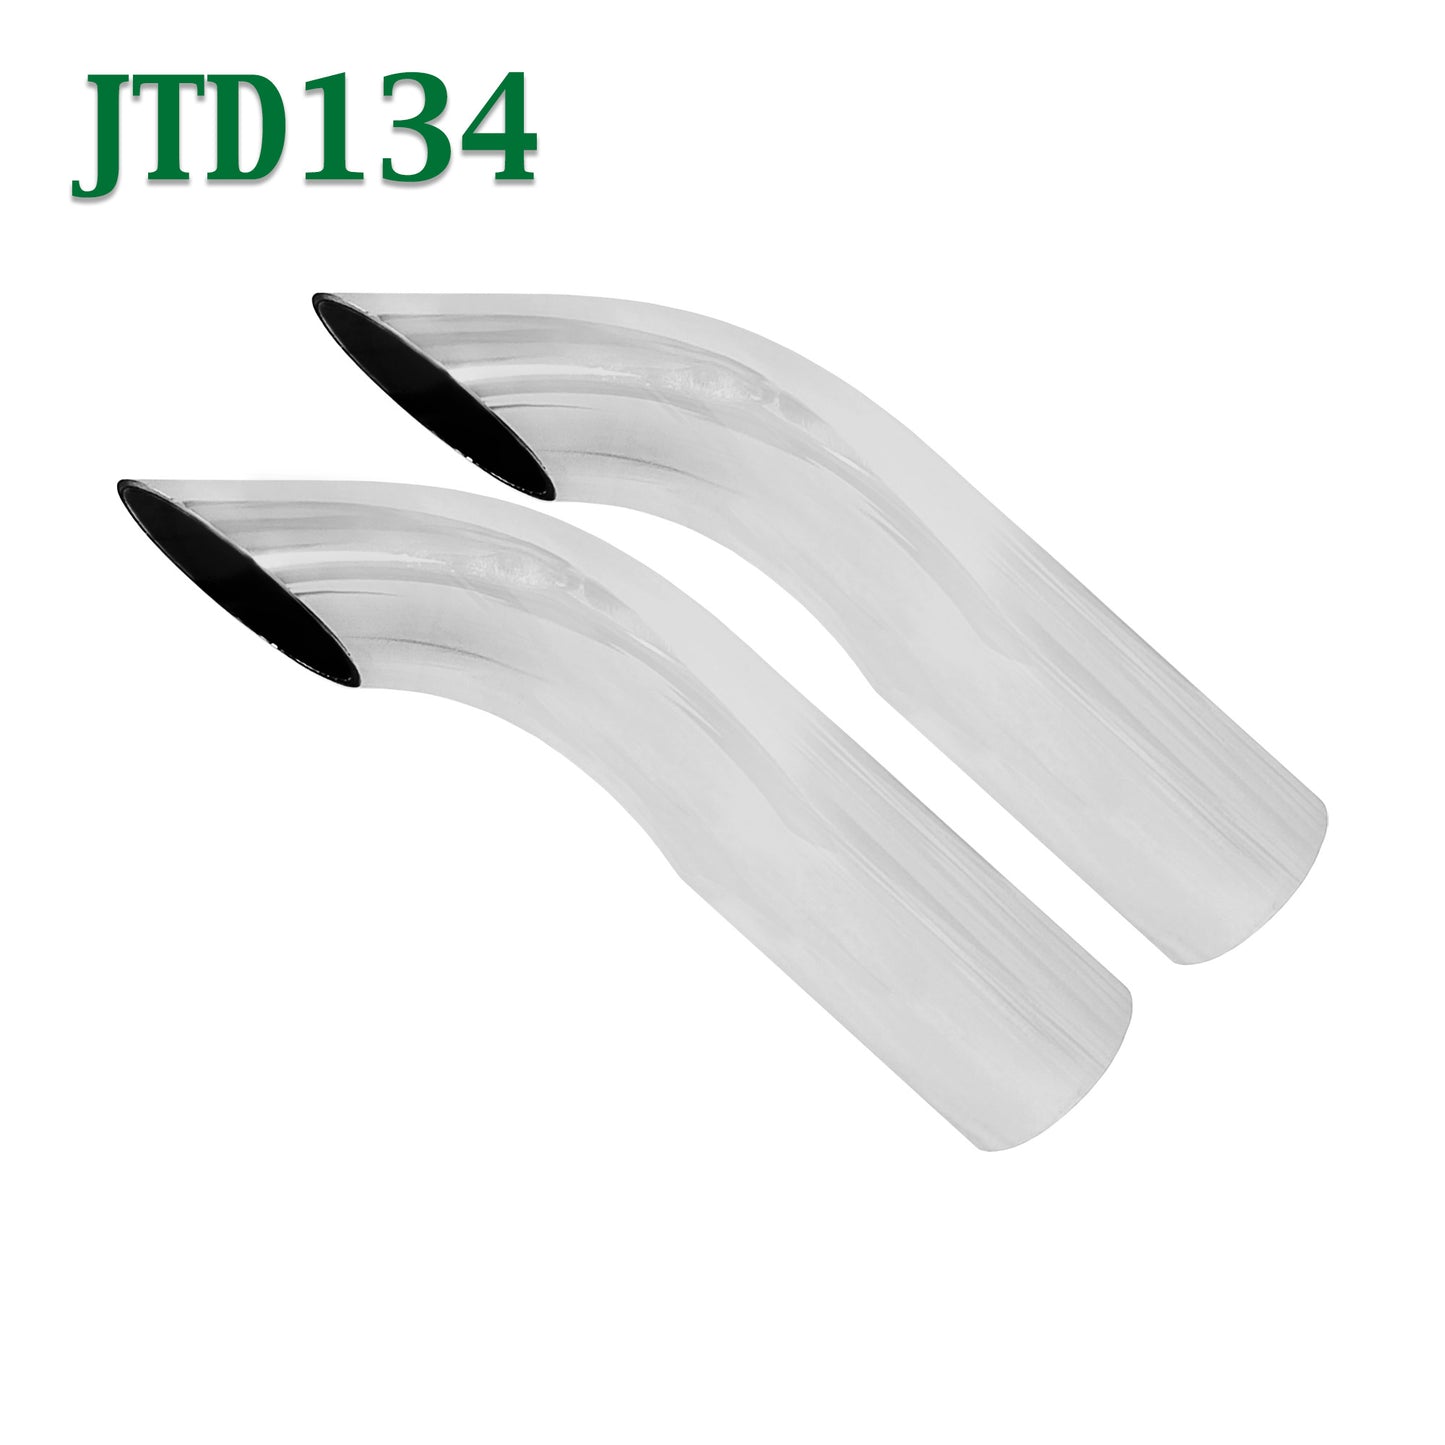 JTD134 1.75" Chrome Turn Down Exhaust Tip 1 3/4" Inlet / 2" Outlet / 8 1/2" Long